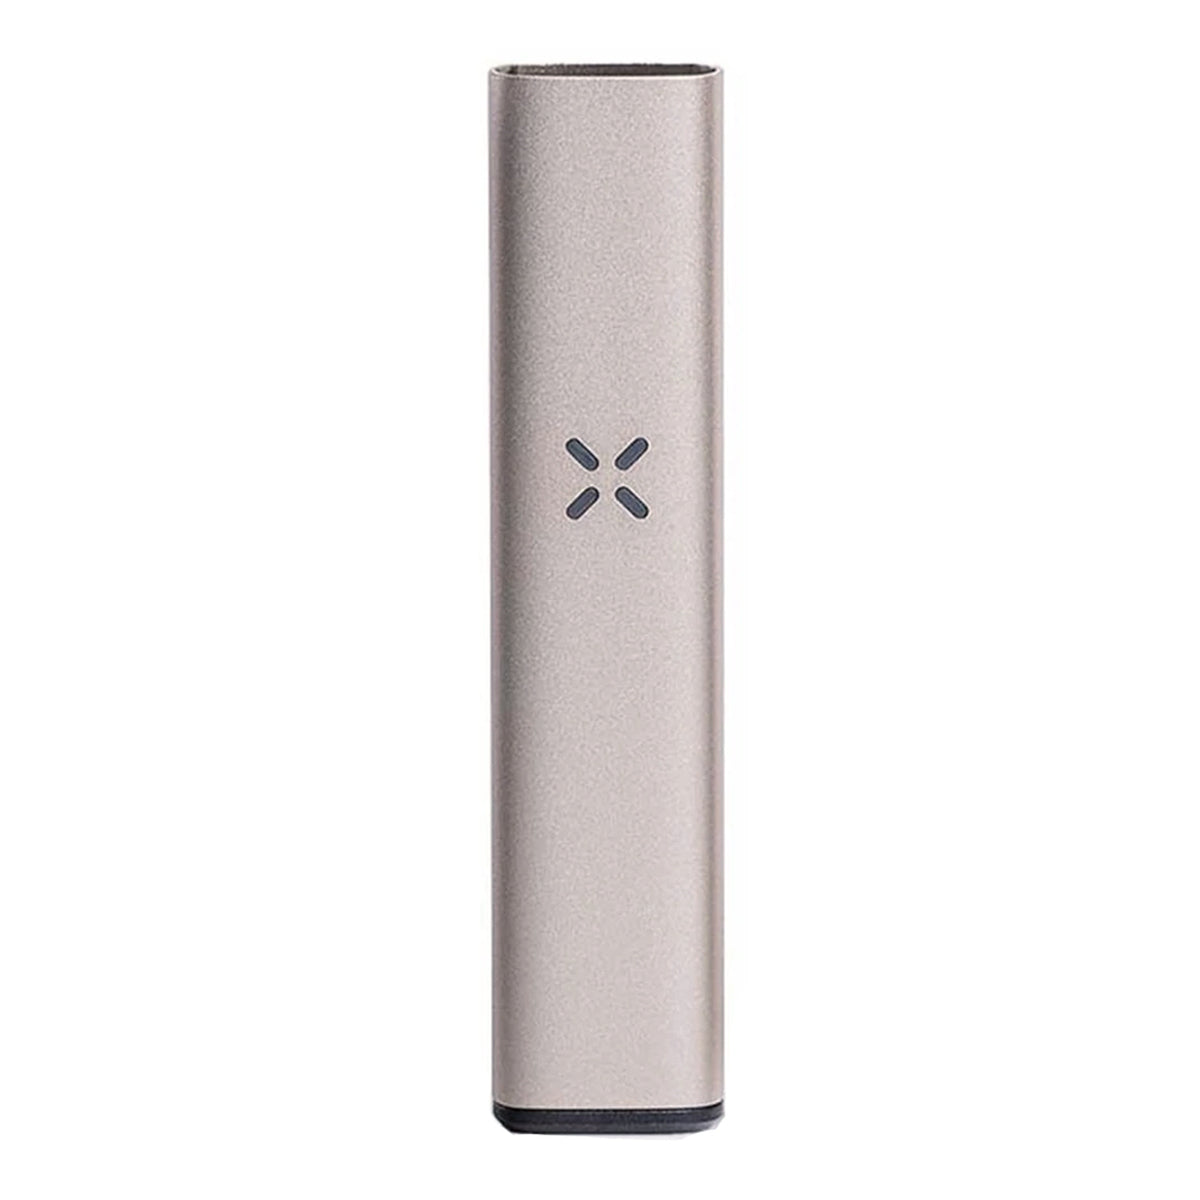 The PAX Era Pro takes everything we love about the ultra-portable PAX Era and adds in a number of nifty features to take the experience even further. An update to the original Era model, the Pro edition has several add-on features compared to its predecessor. This includes ExpertTemp technology, pod memory, haptic feedback, and a UL-certified battery.